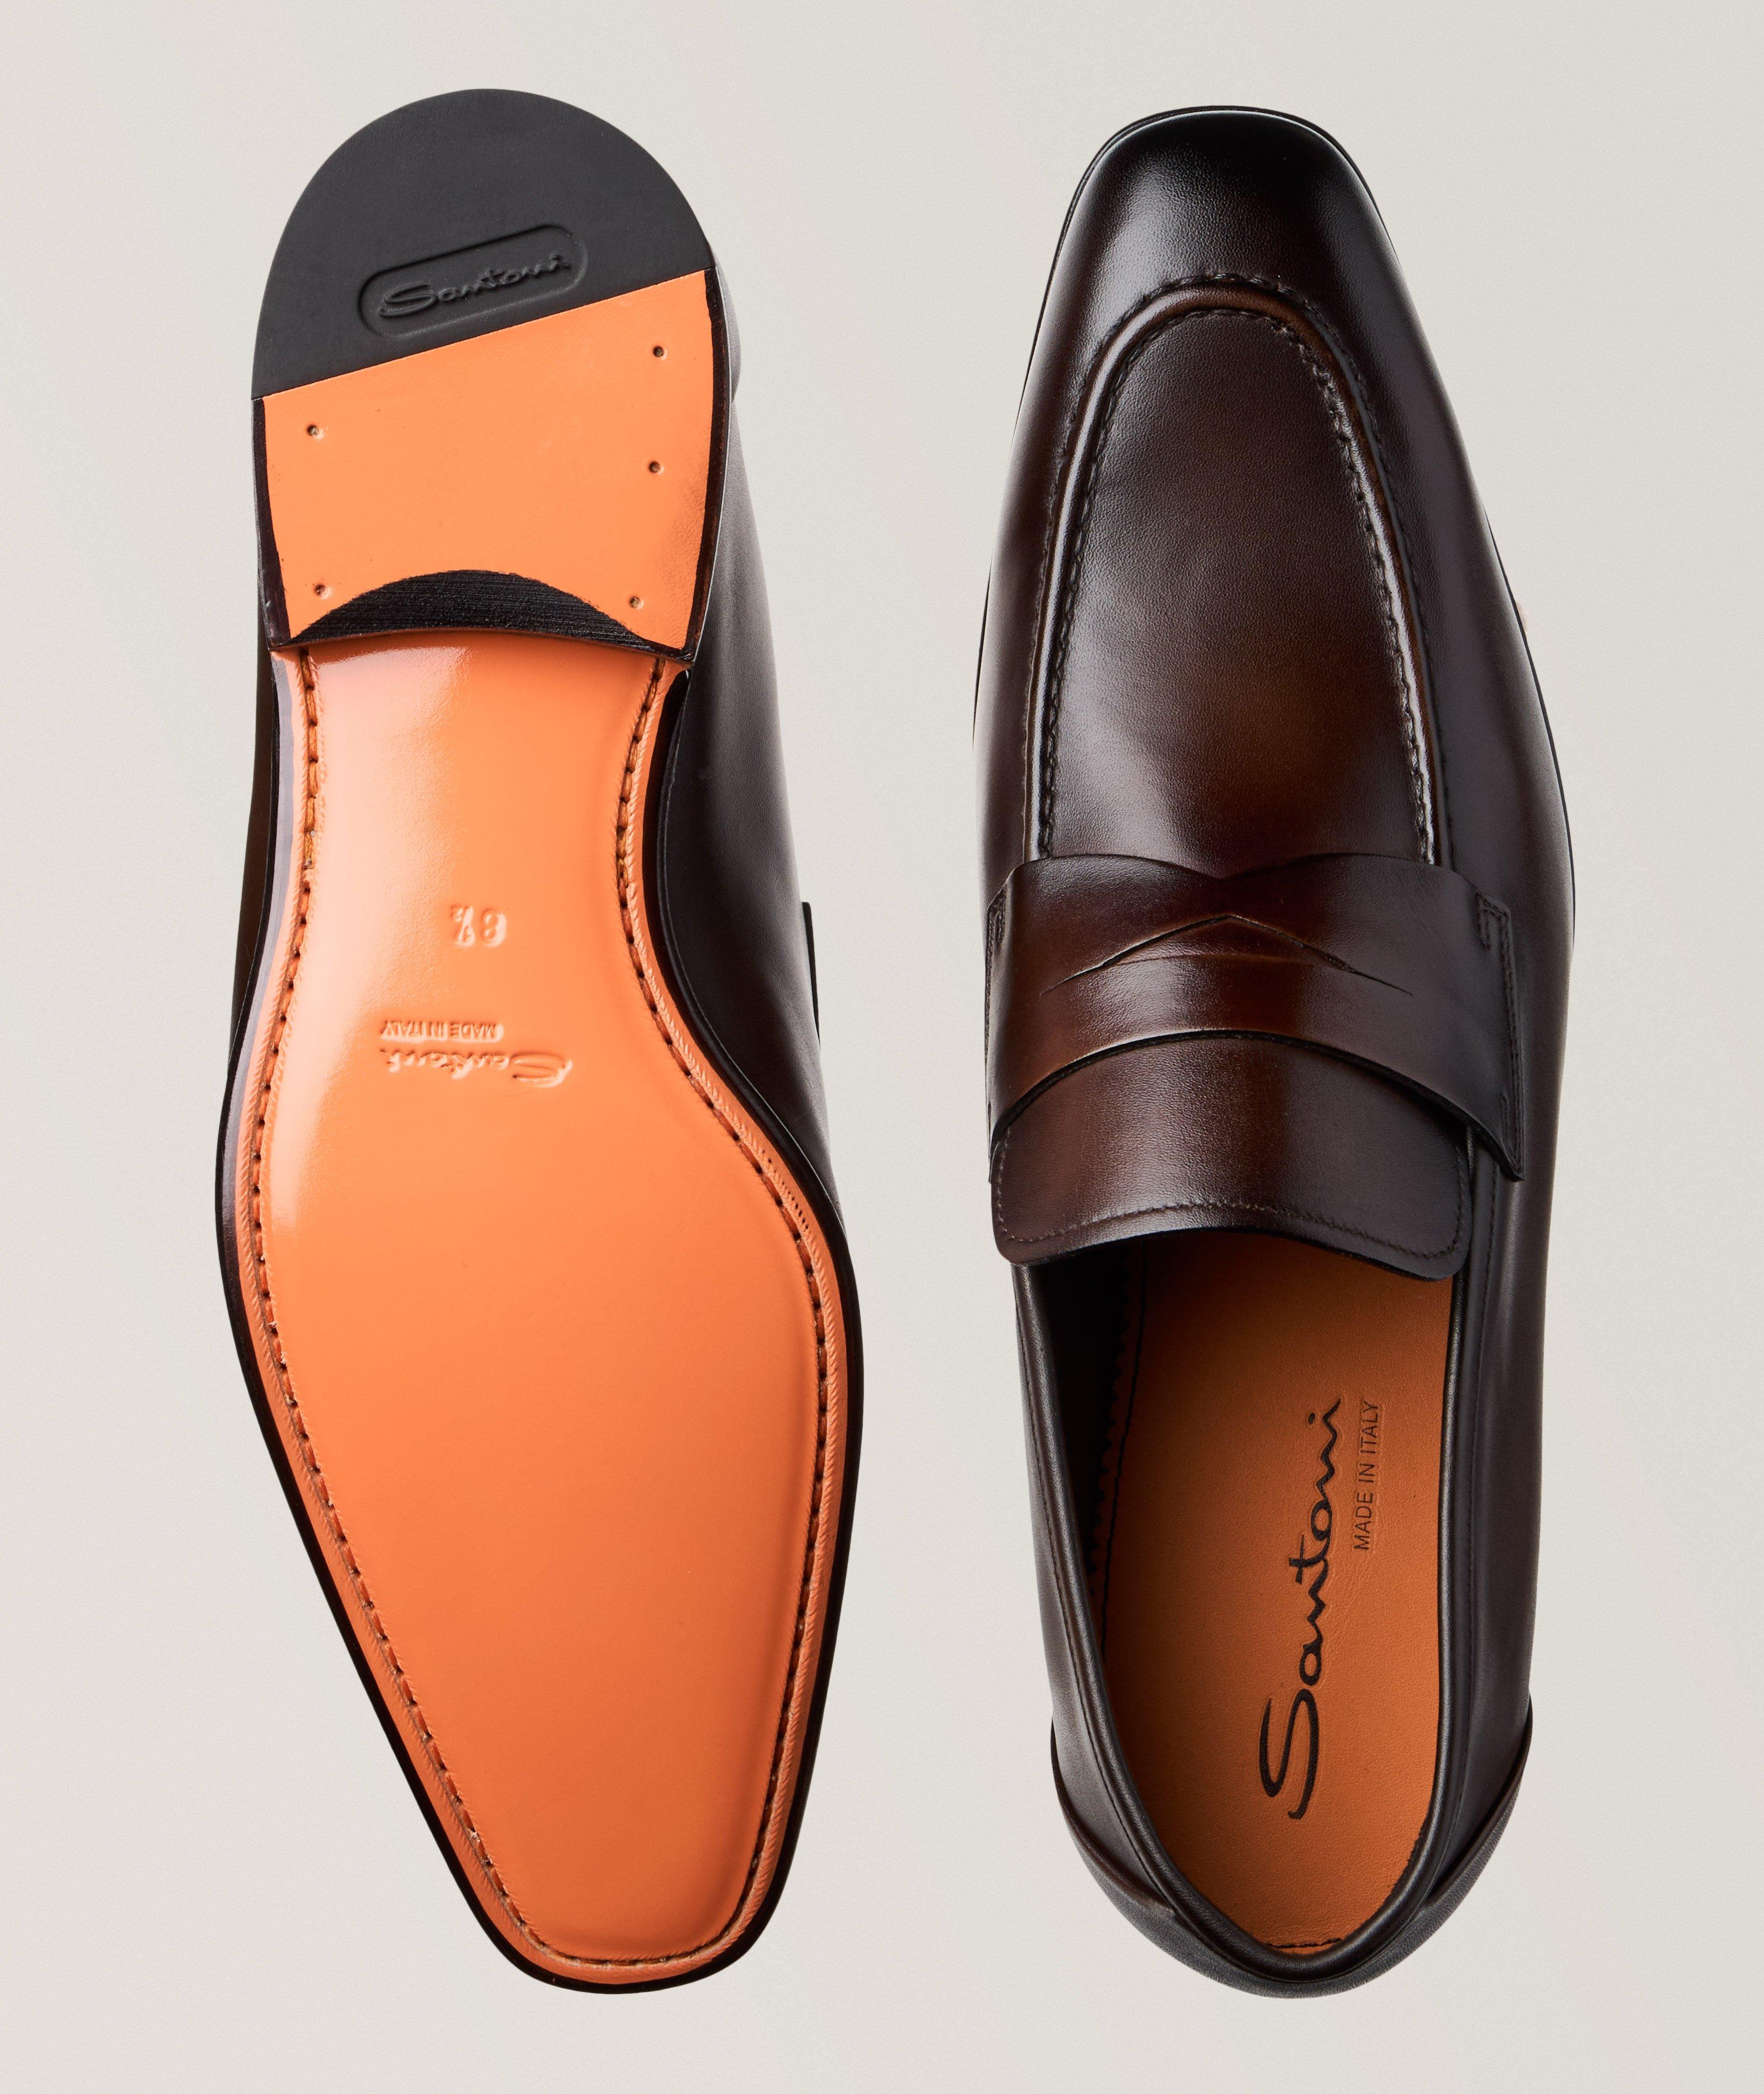 Gannon Leather Loafers image 2